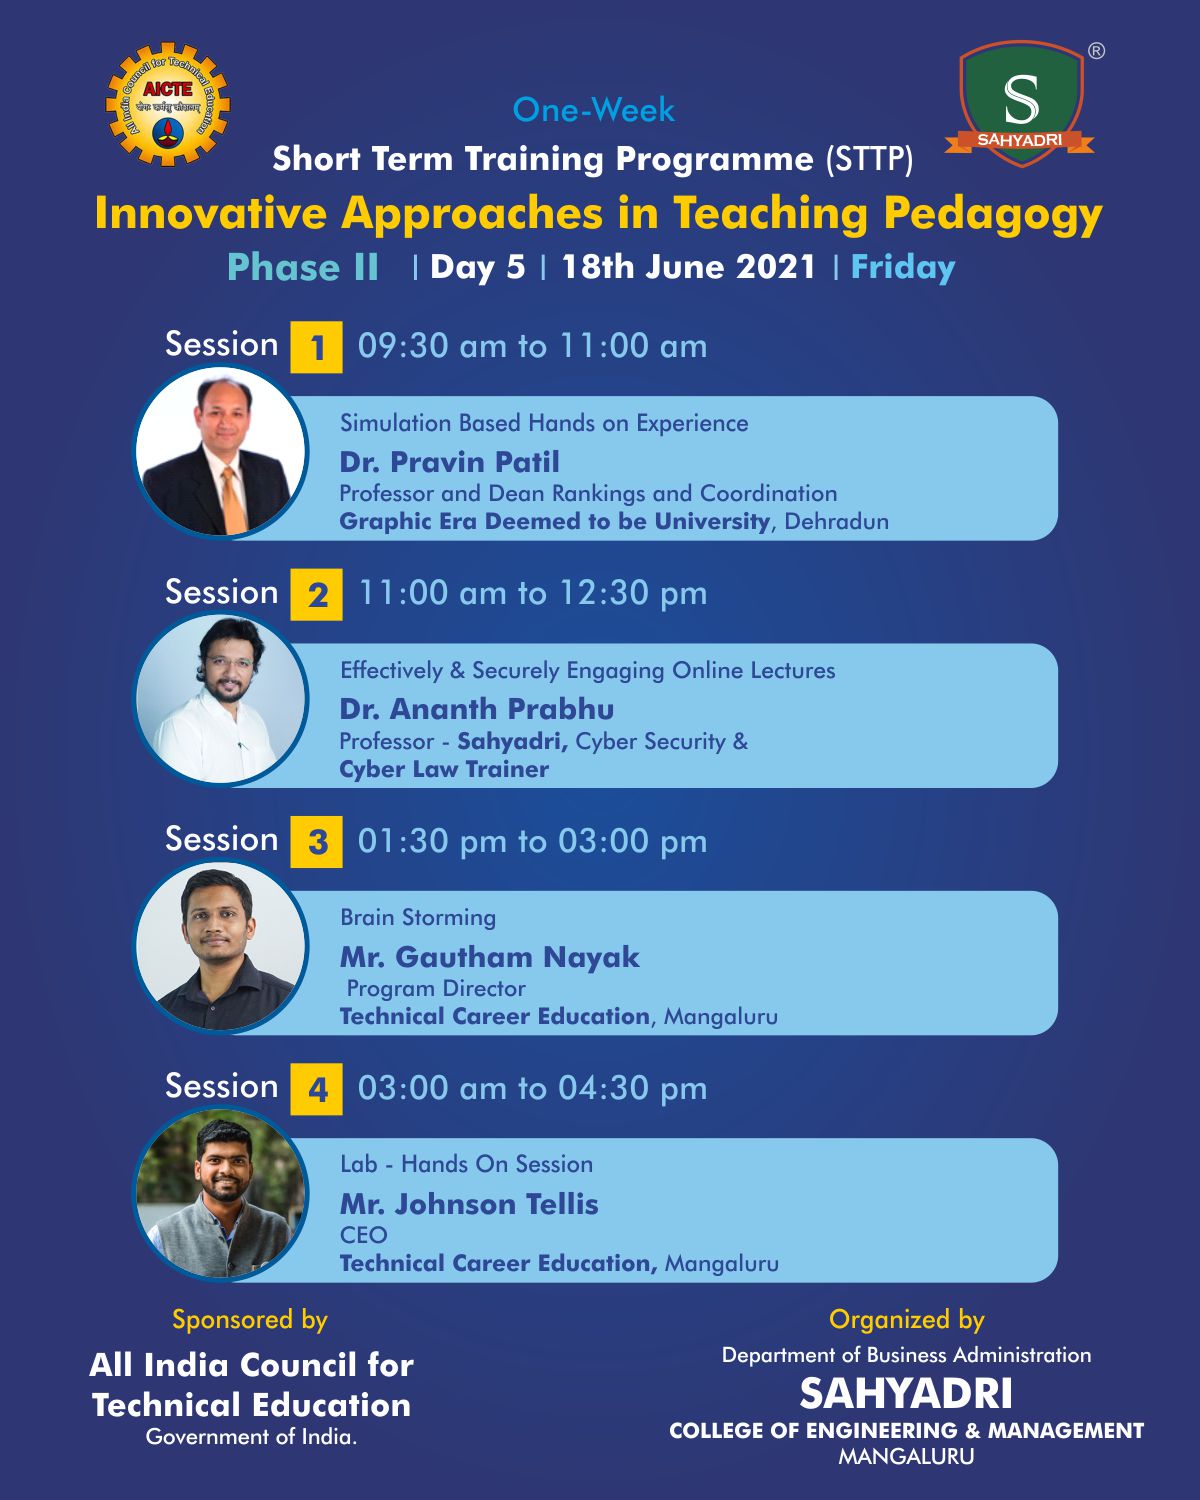 Phase II: AICTE Sponsored One-Week STTP on “Innovative Approaches in Teaching Pedagogy”